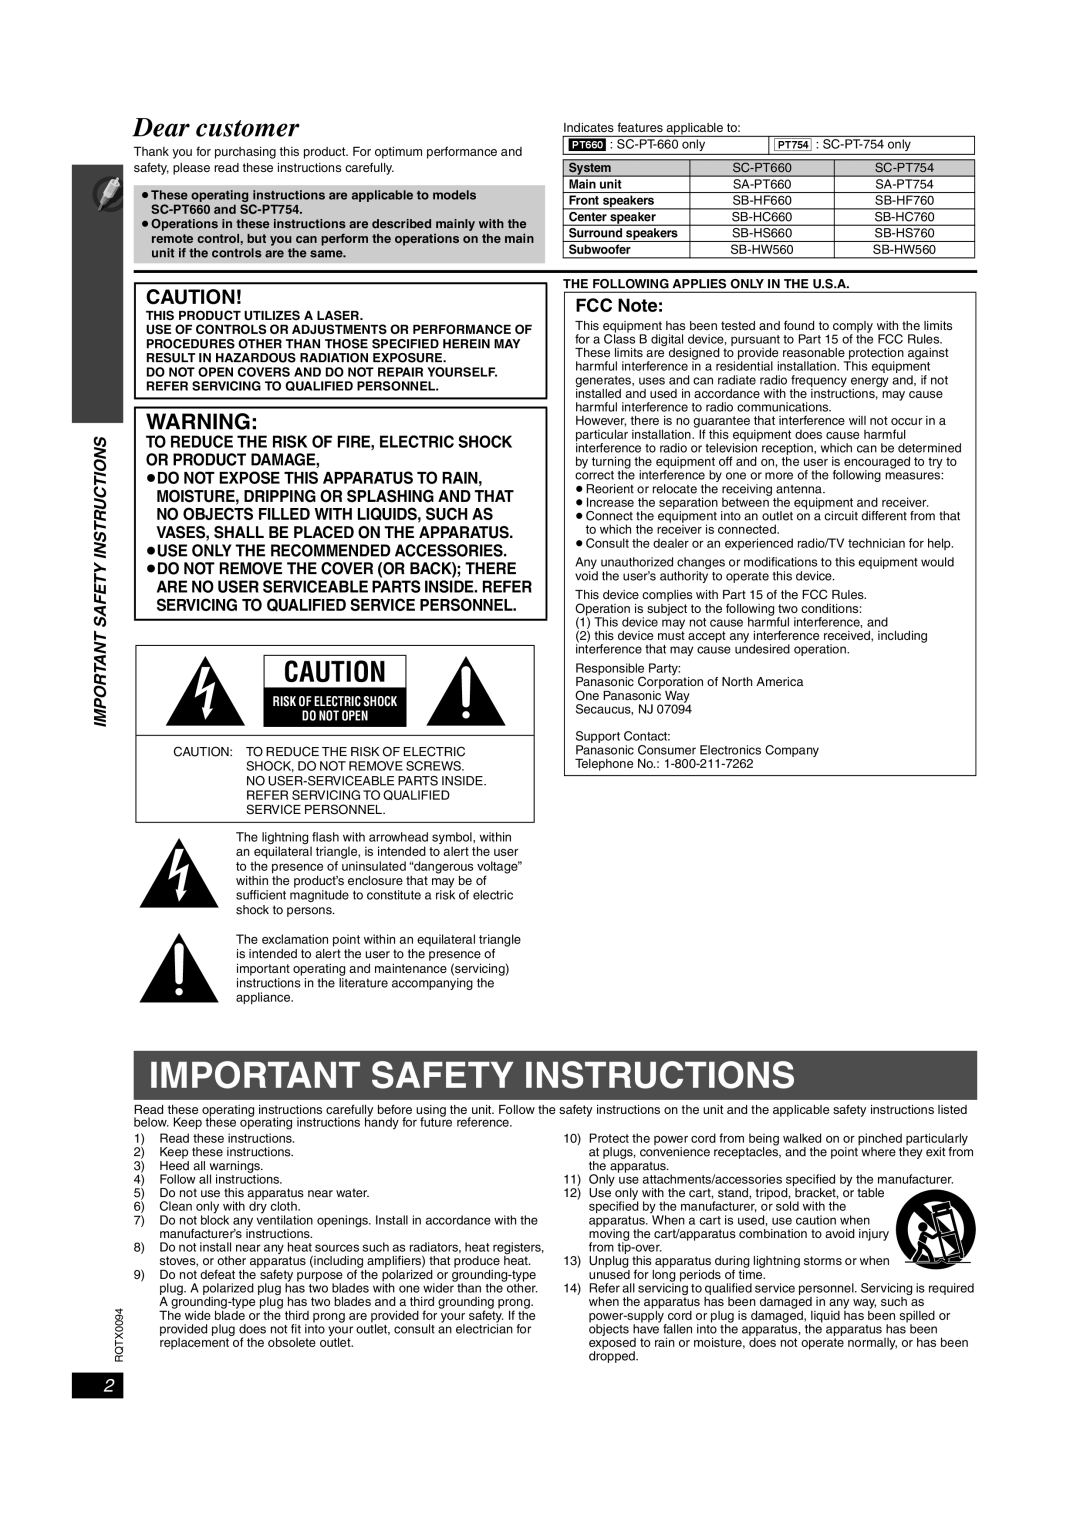 Panasonic SC-PT660, SC-PT754 manual Important Safety Instructions, FCC Note, ≥Do Not Expose This Apparatus To Rain 